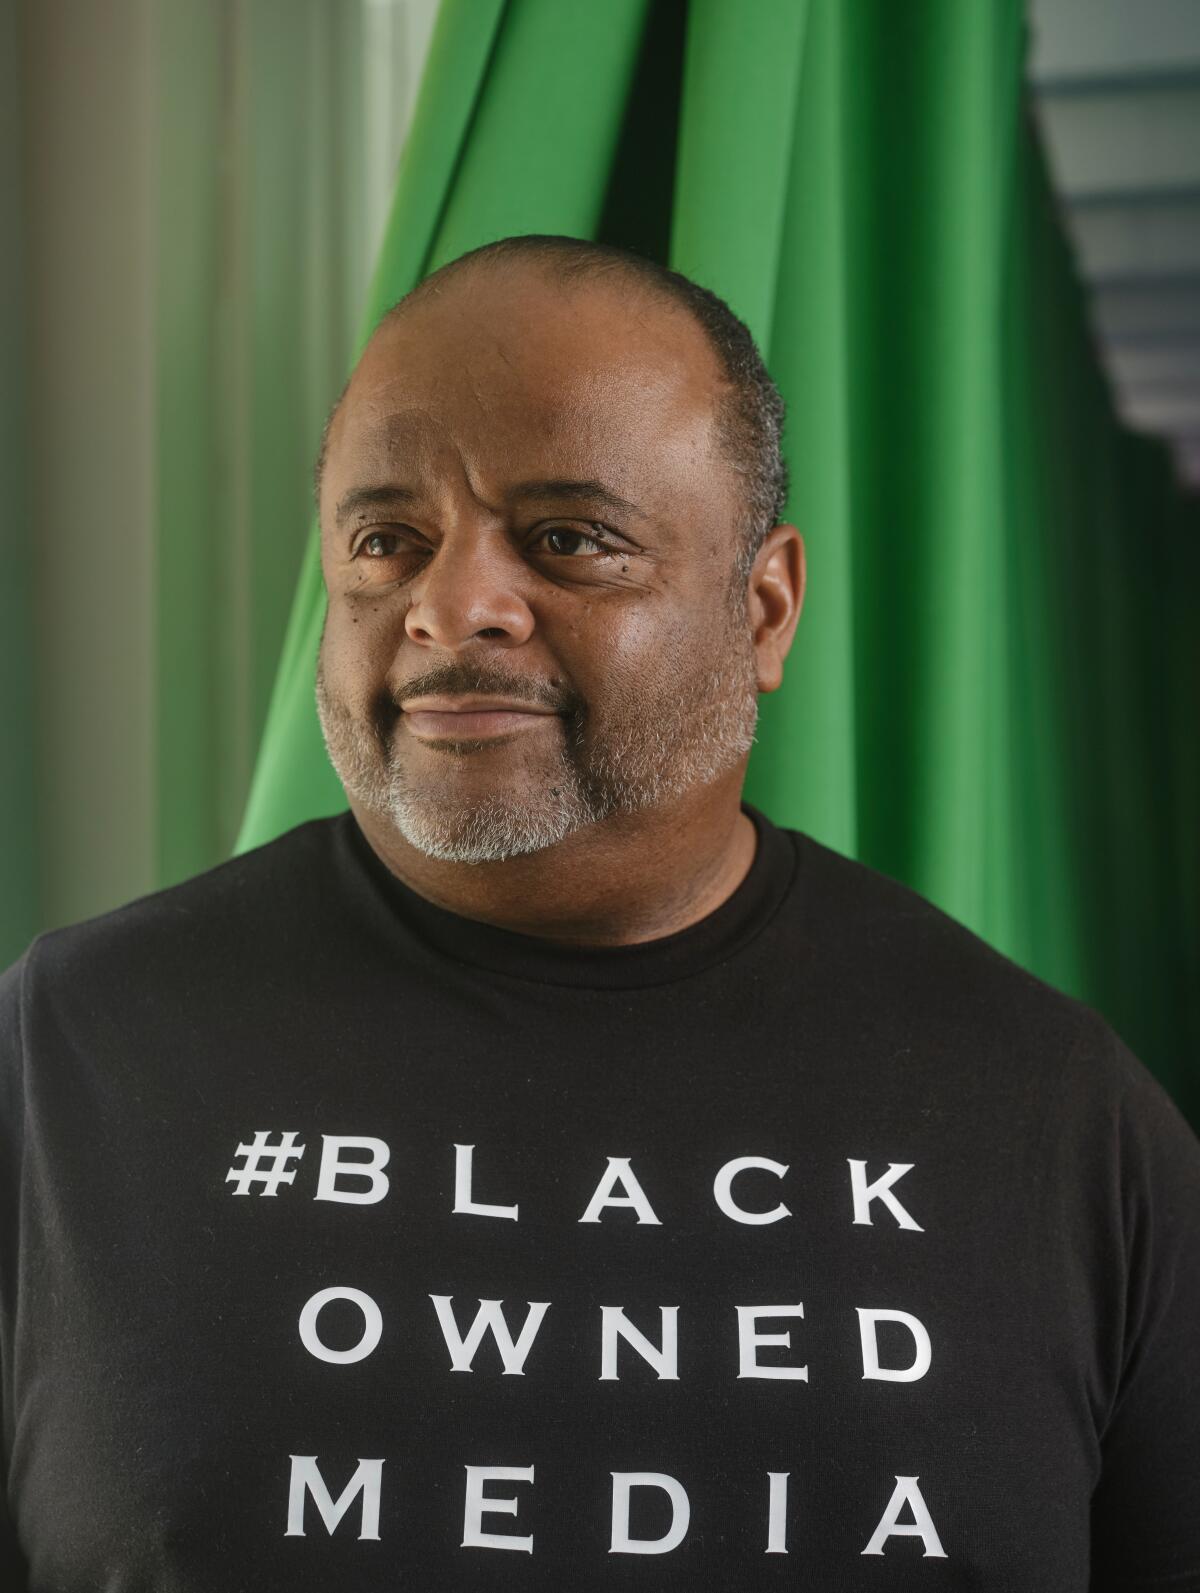 A man stands in a black T-shirt stands in front of green screen fabric.